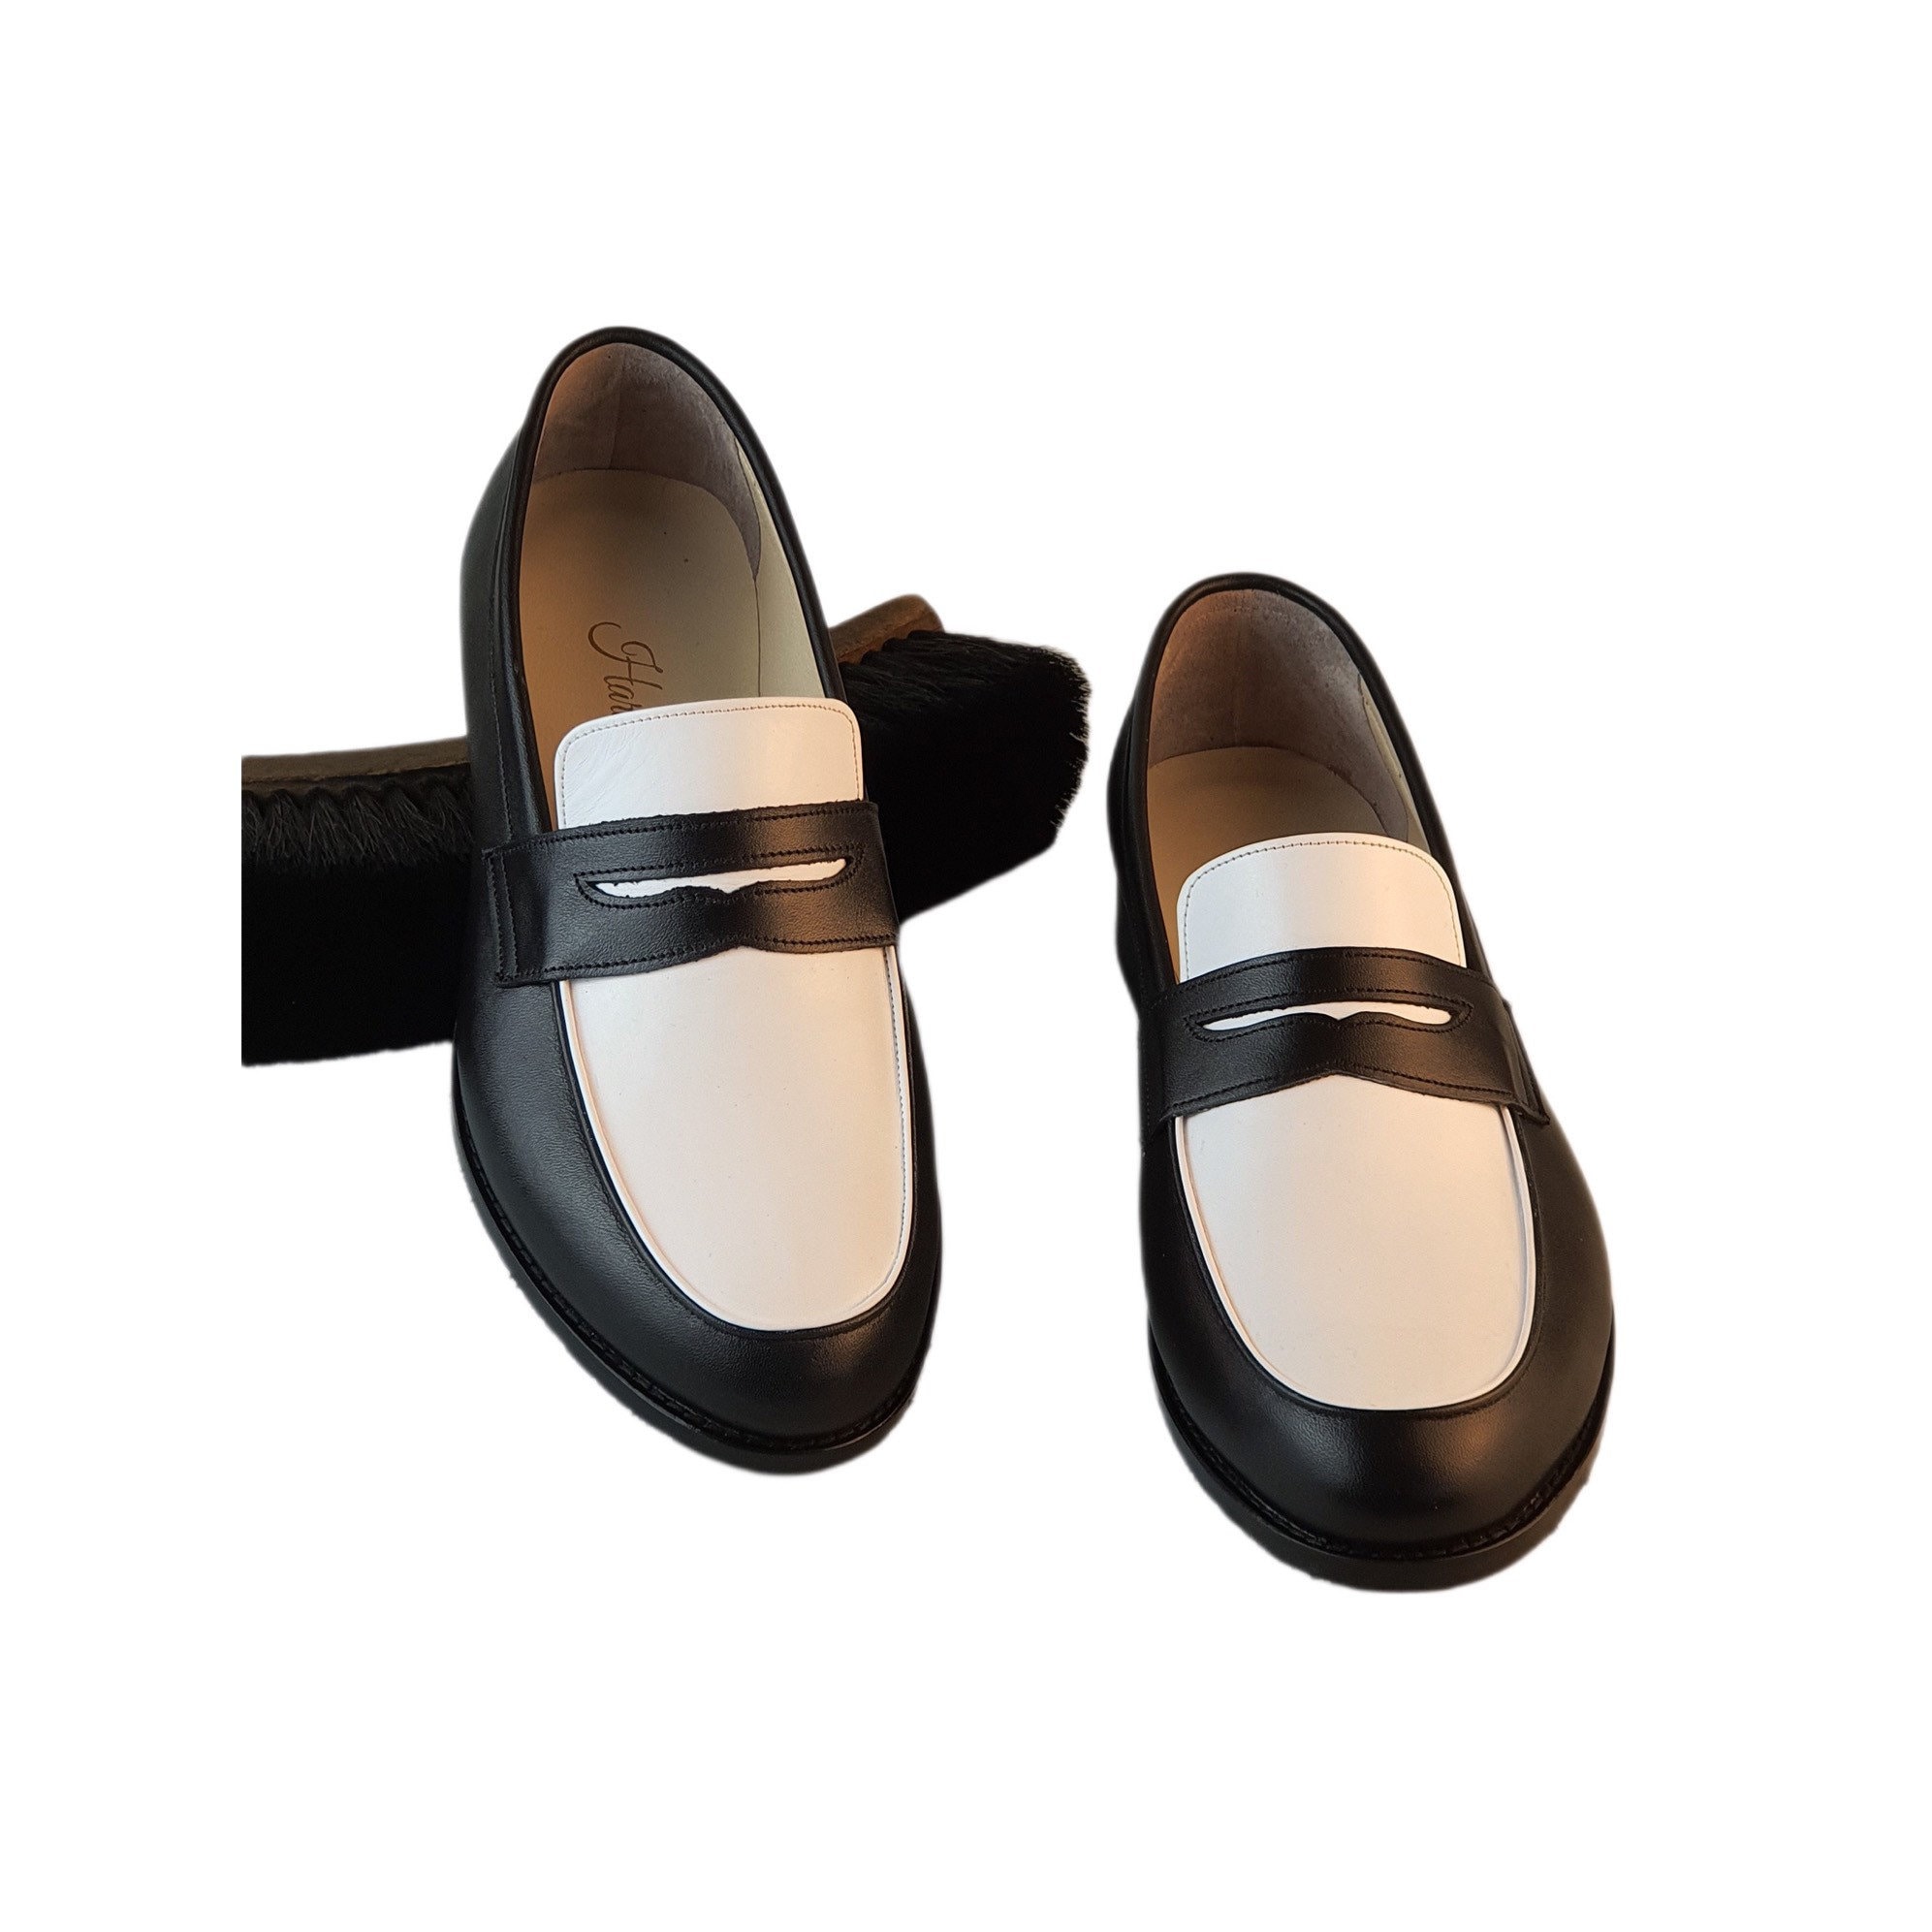 Loafers in Black & White Leather | Men's Swing Dance Shoes | Vintage Shoes | Customized | Harlem Shoes